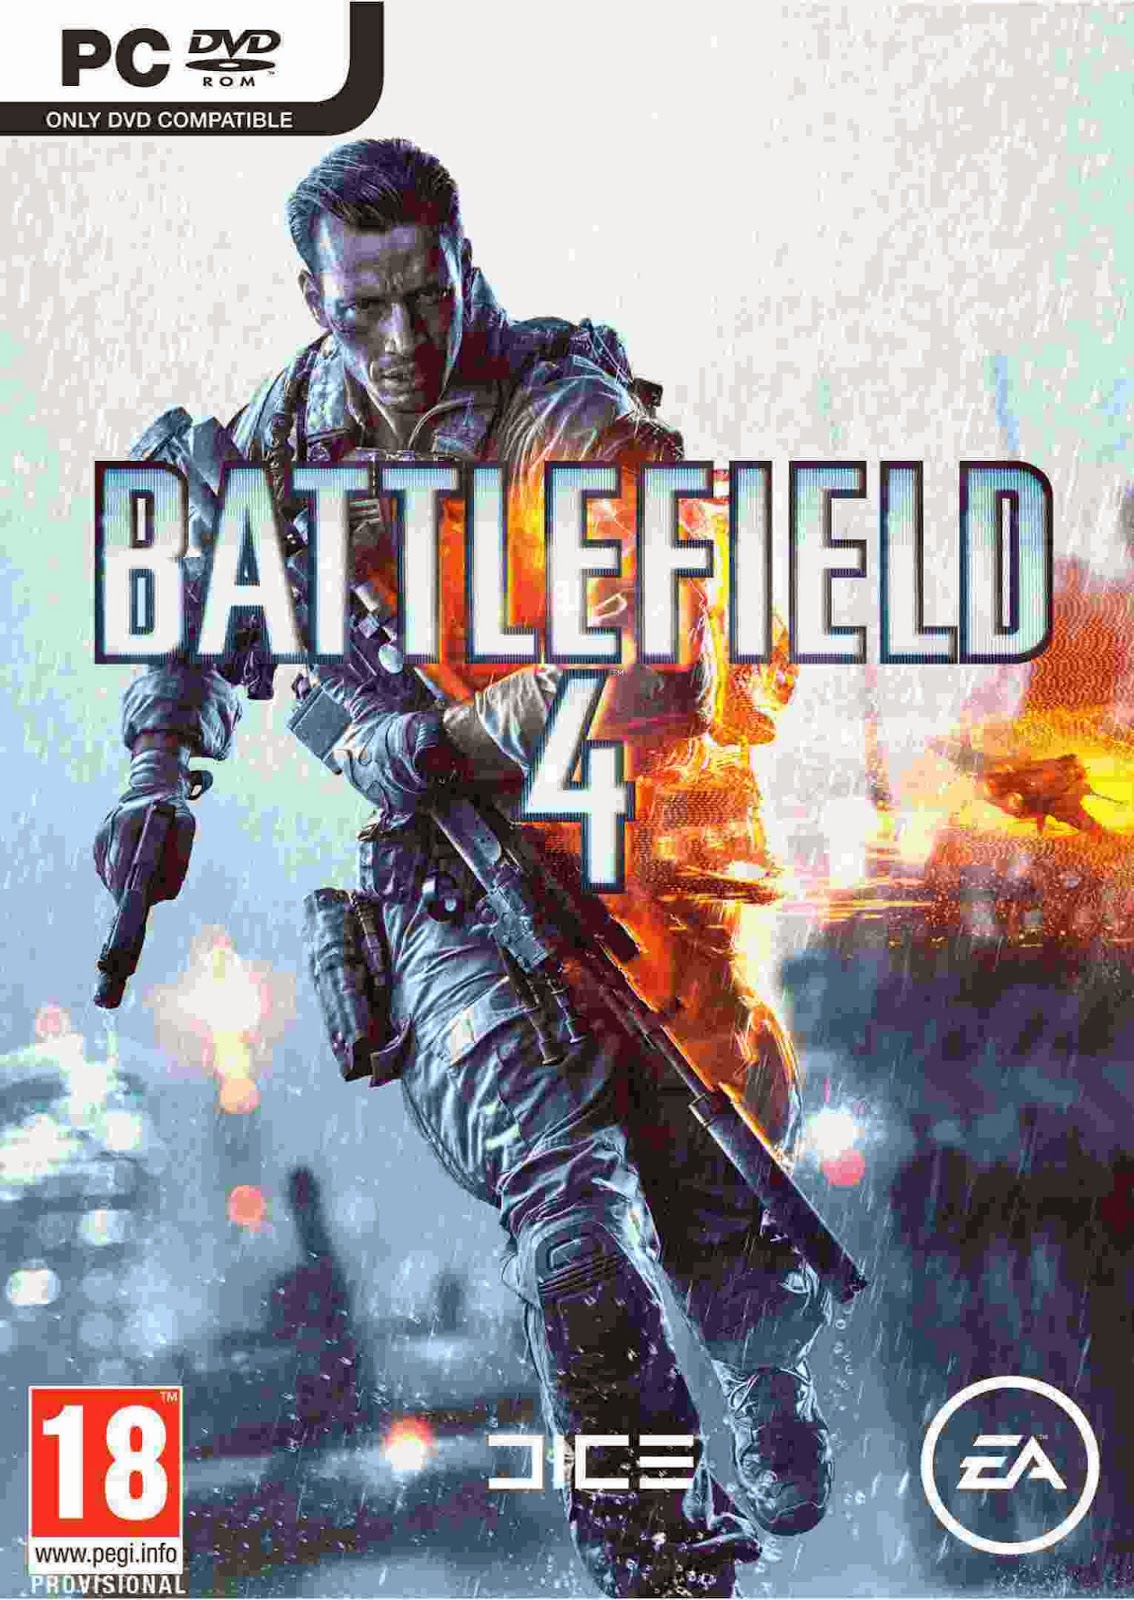 Battlefield 4 System Requirements | pc-android games ...